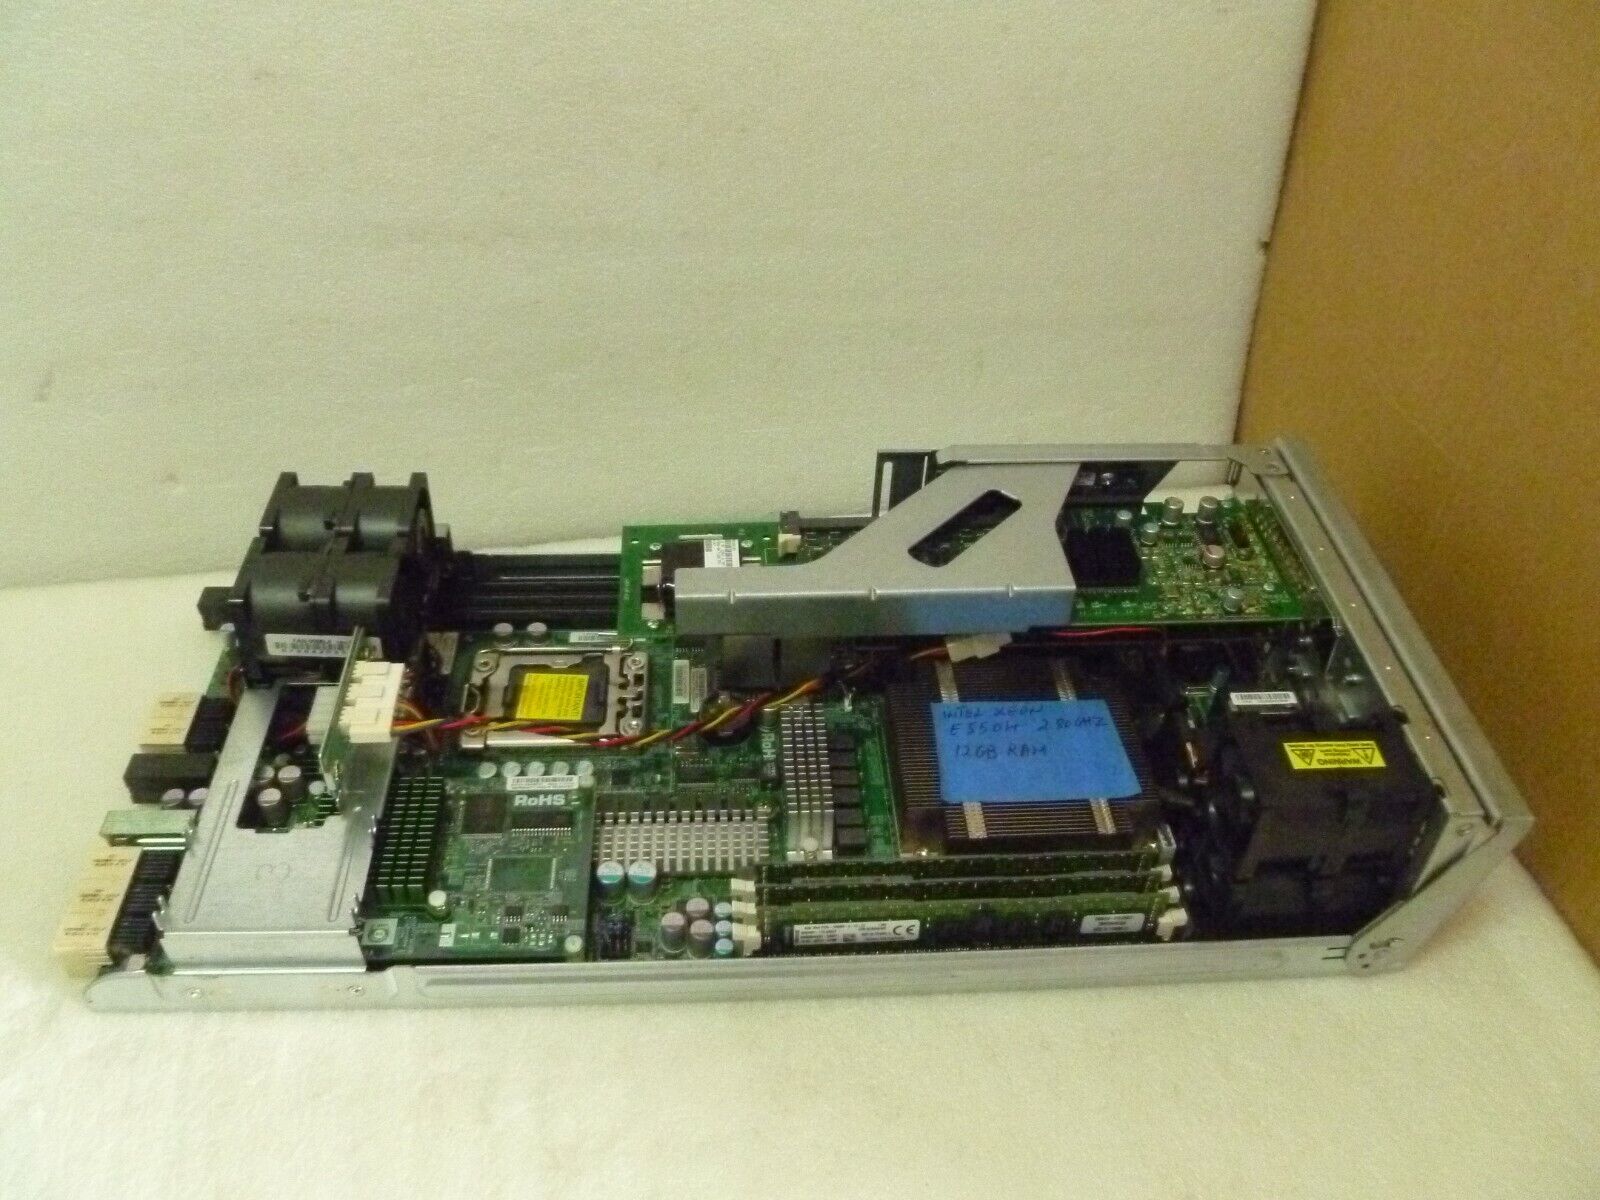 Supermicro X8DTS-F Server Motherboard, Intel Xeon E5504 2.00GHz, 12GB MEMORY